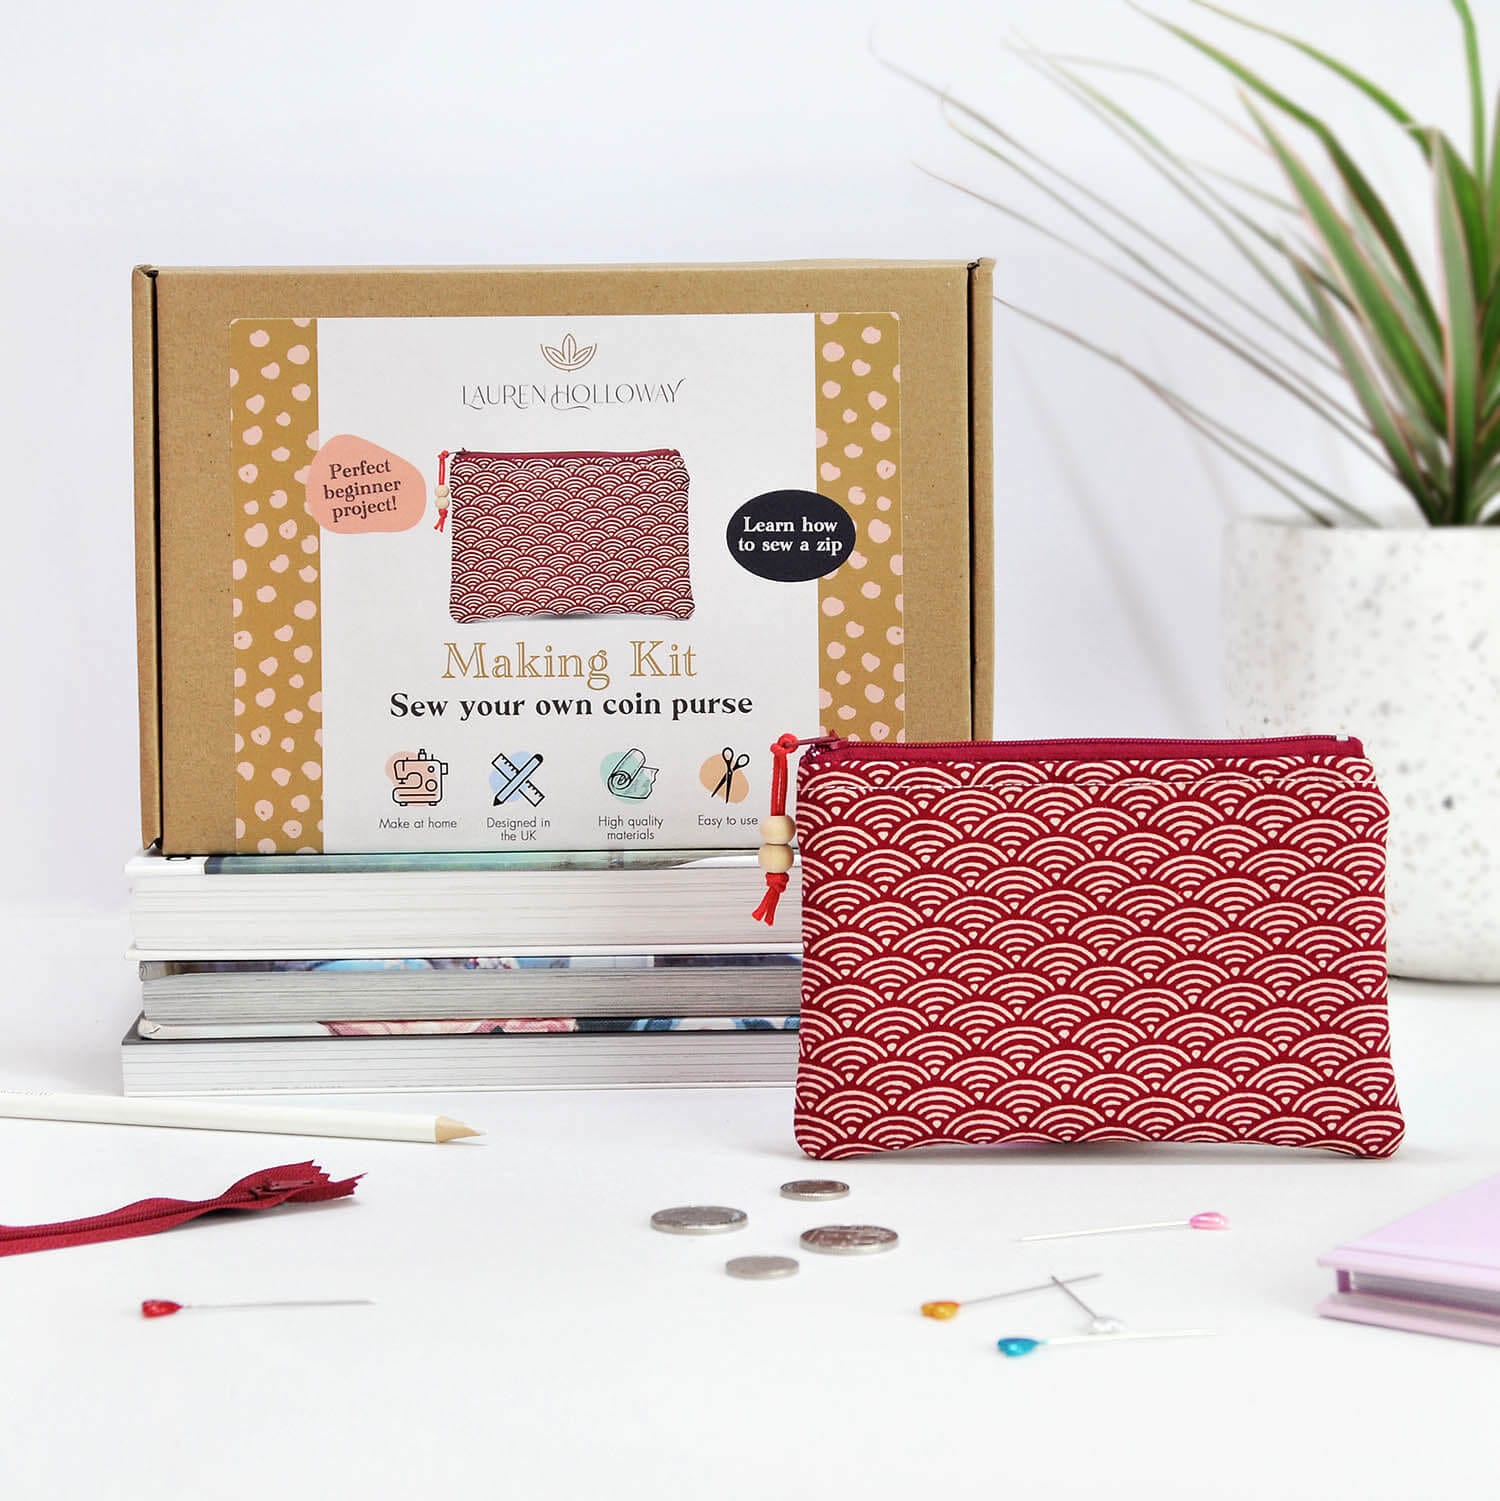 Lauren Holloway Purse / Wallet Sew Your Own Coin Purse Making Kit